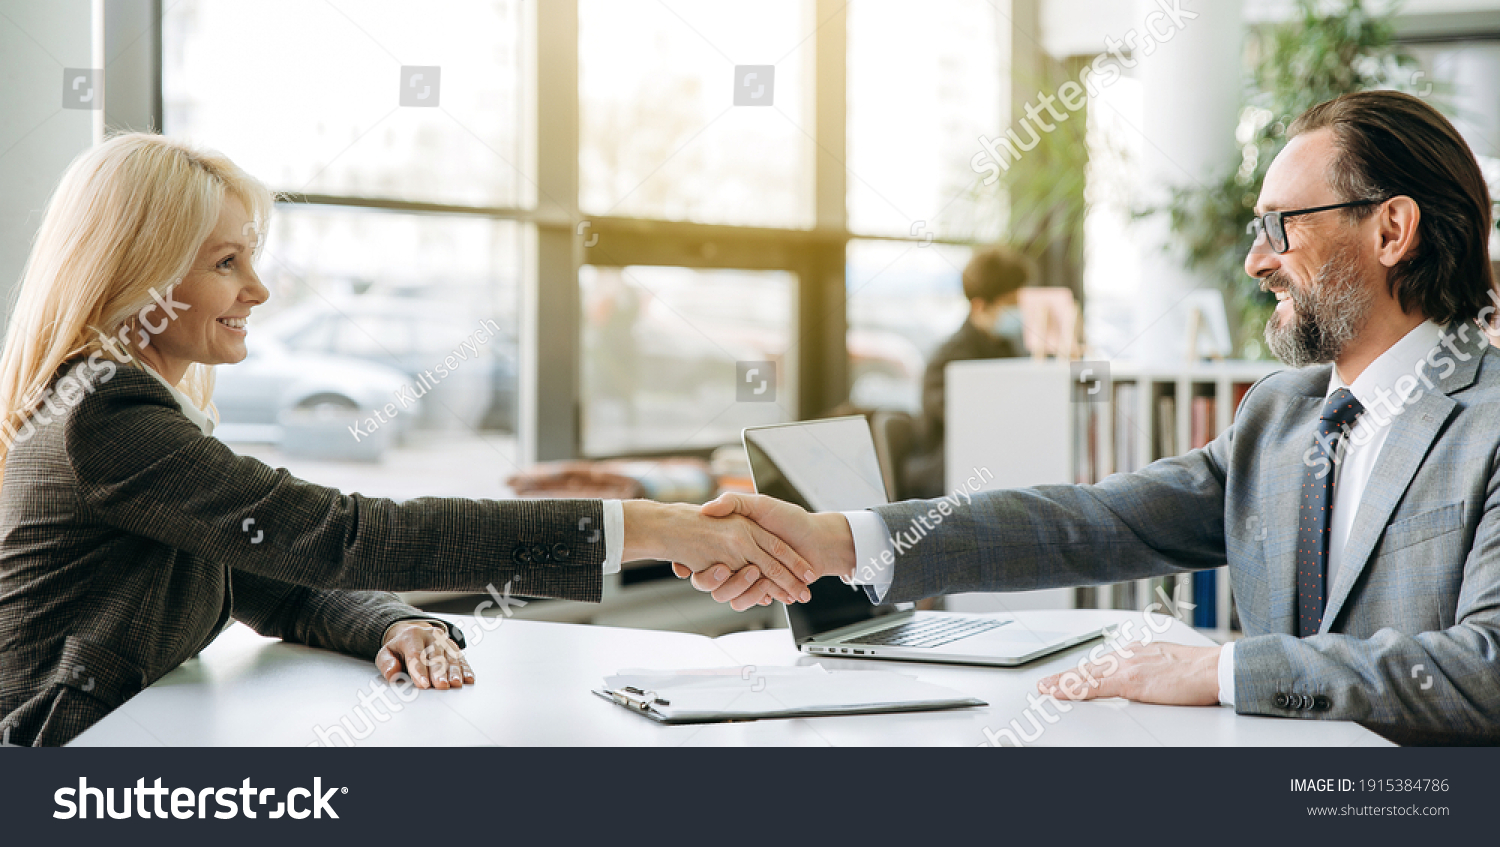 Confident business partners is shaking hands at meeting or after successful negotiations, sitting in modern office. Influential employees sign an important contract or deal, collaboration concept #1915384786